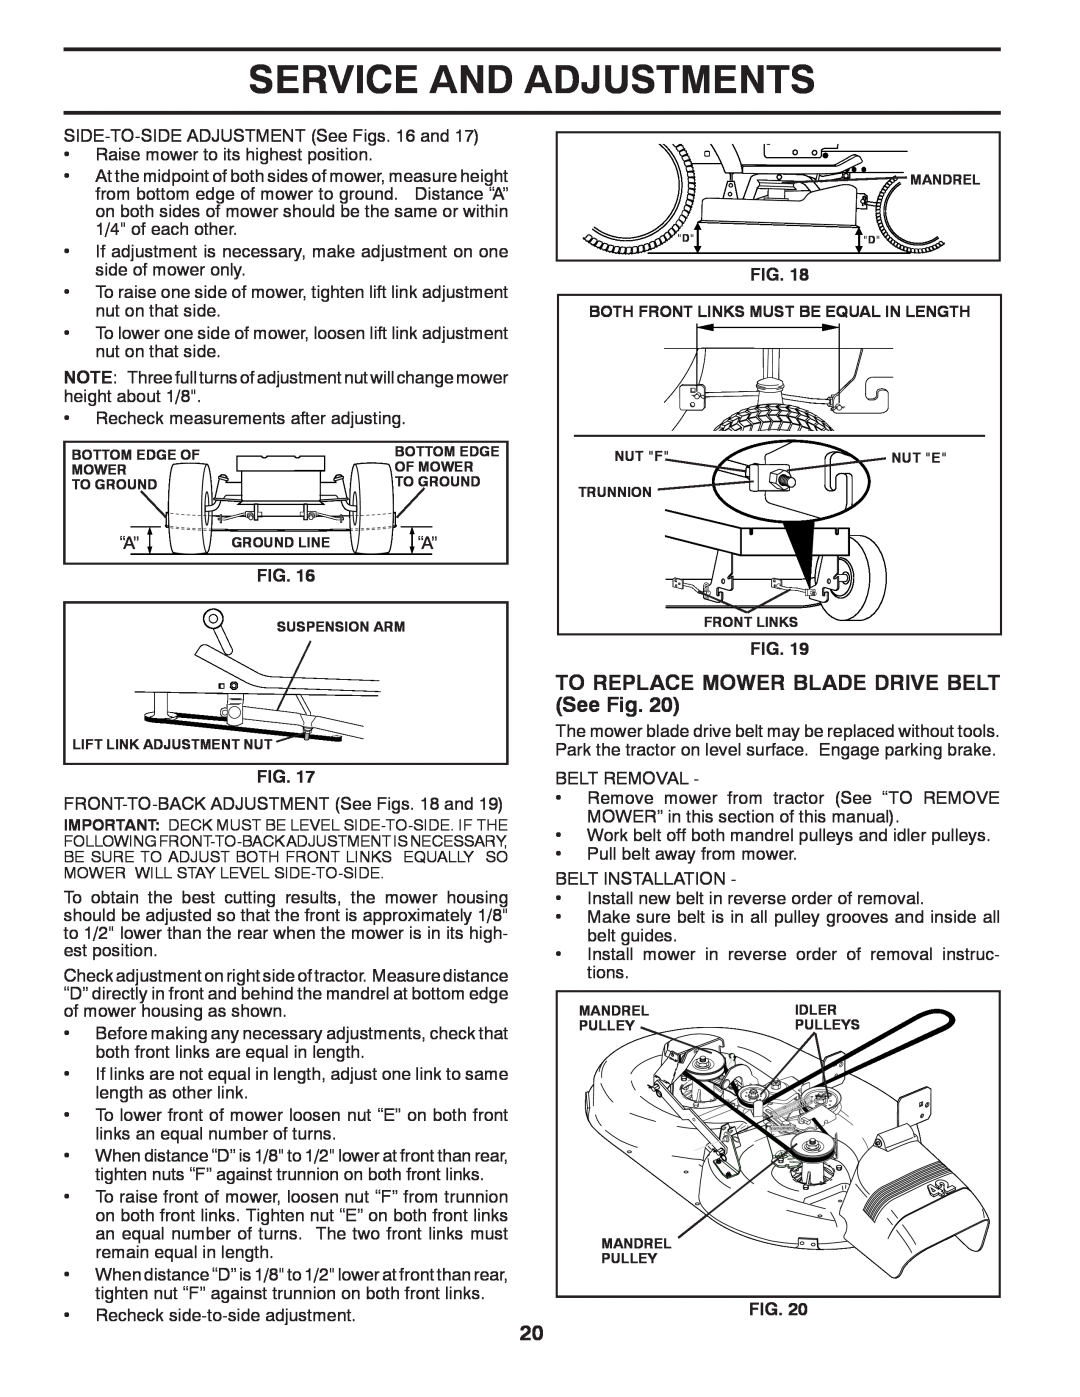 Poulan 96012008500, 418791 manual TO REPLACE MOWER BLADE DRIVE BELT See Fig, Service And Adjustments 